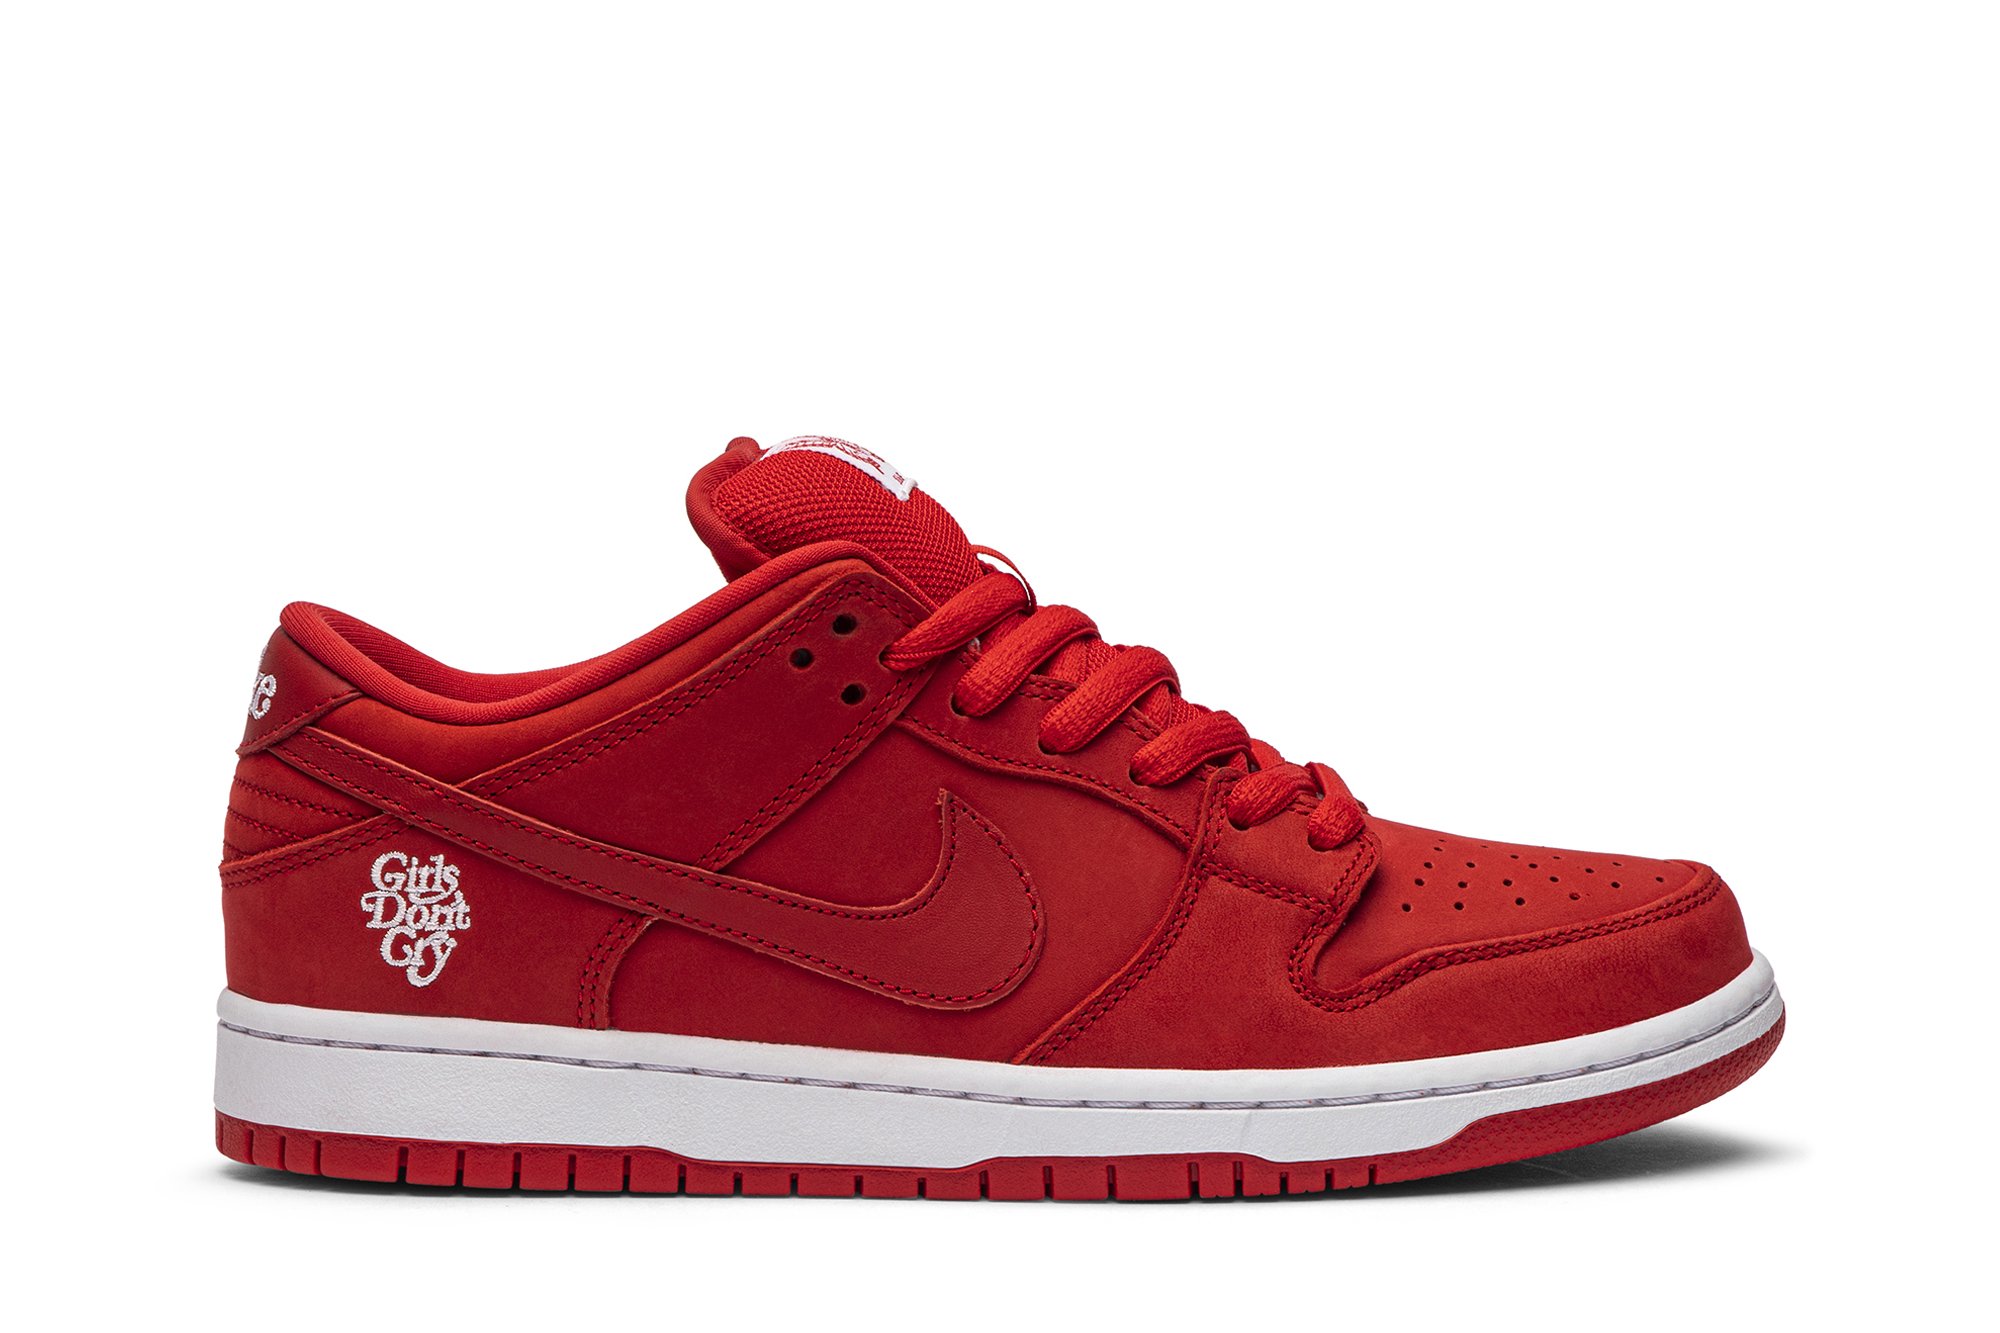 Girls Don't Cry x Dunk Low Pro SB QS 'Coming Back Home' | GOAT